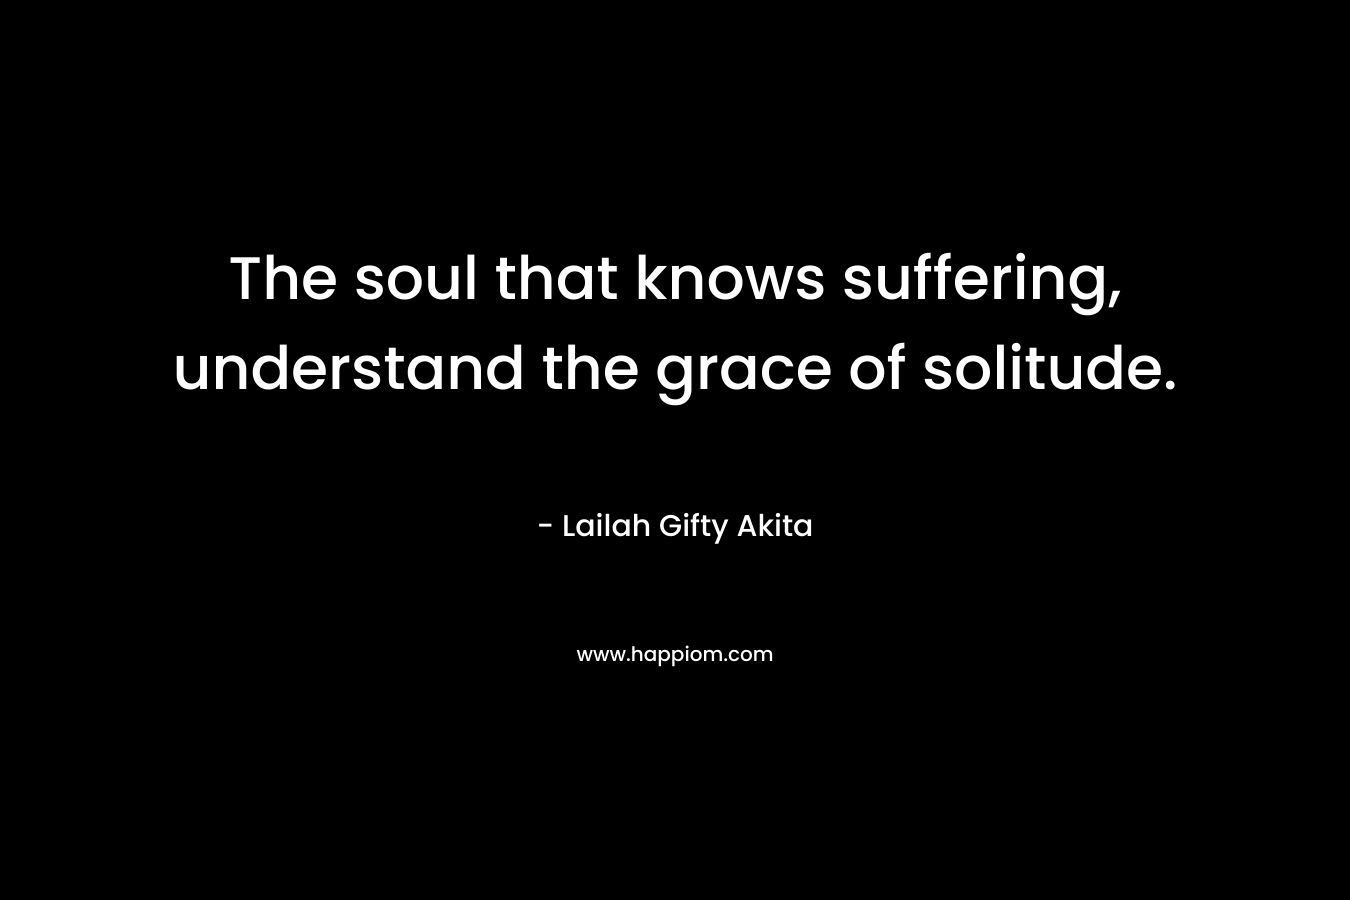 The soul that knows suffering, understand the grace of solitude.